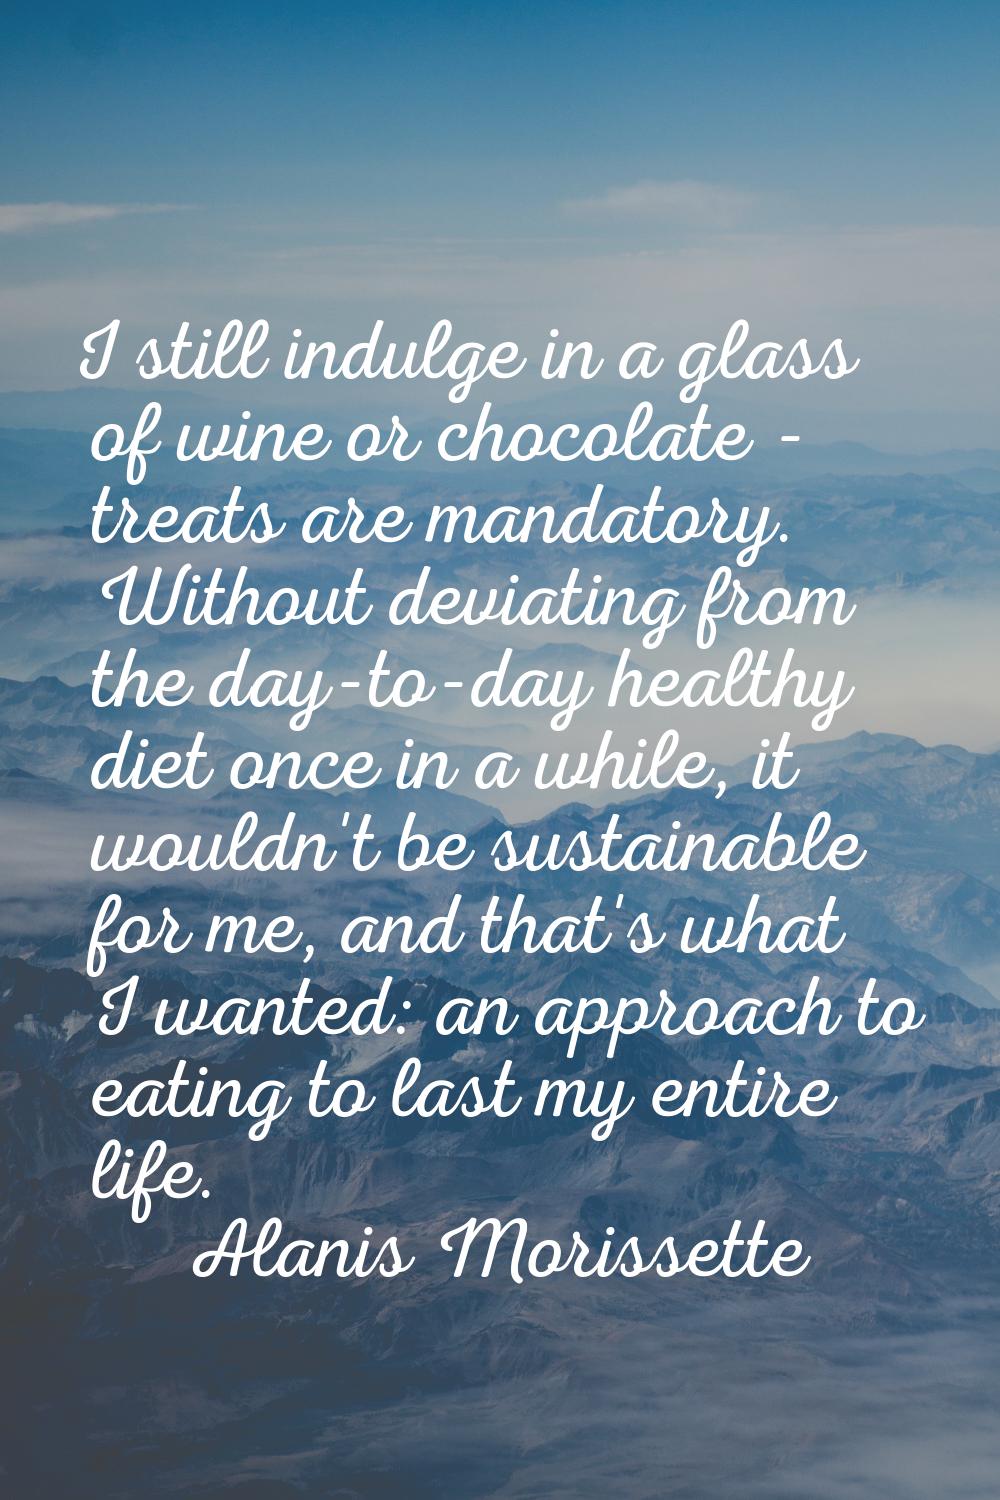 I still indulge in a glass of wine or chocolate - treats are mandatory. Without deviating from the 